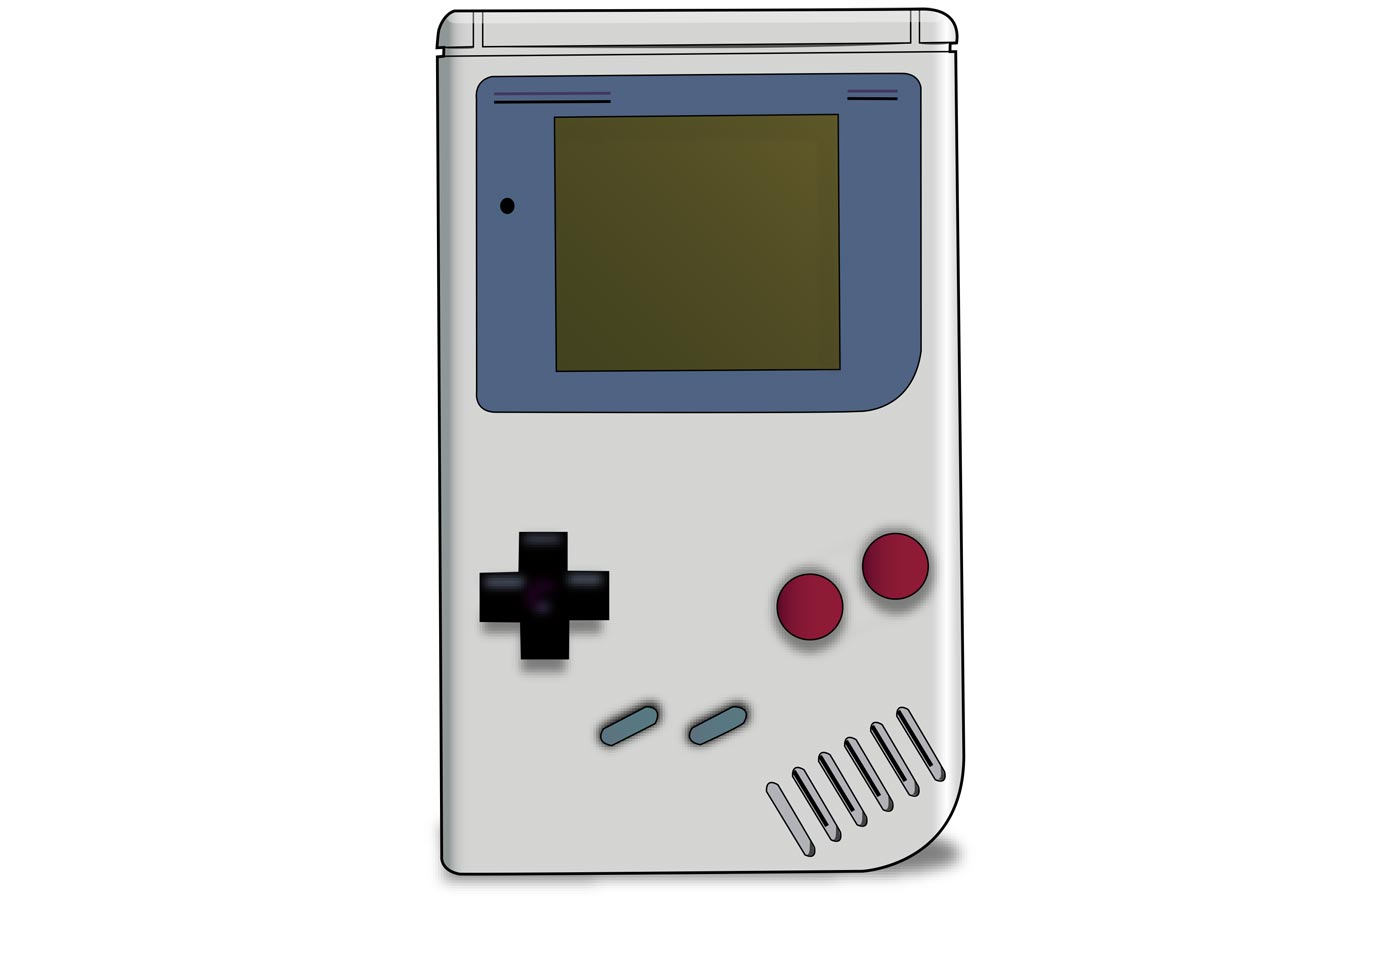 Download game boy - Download Free Vector Art, Stock Graphics & Images